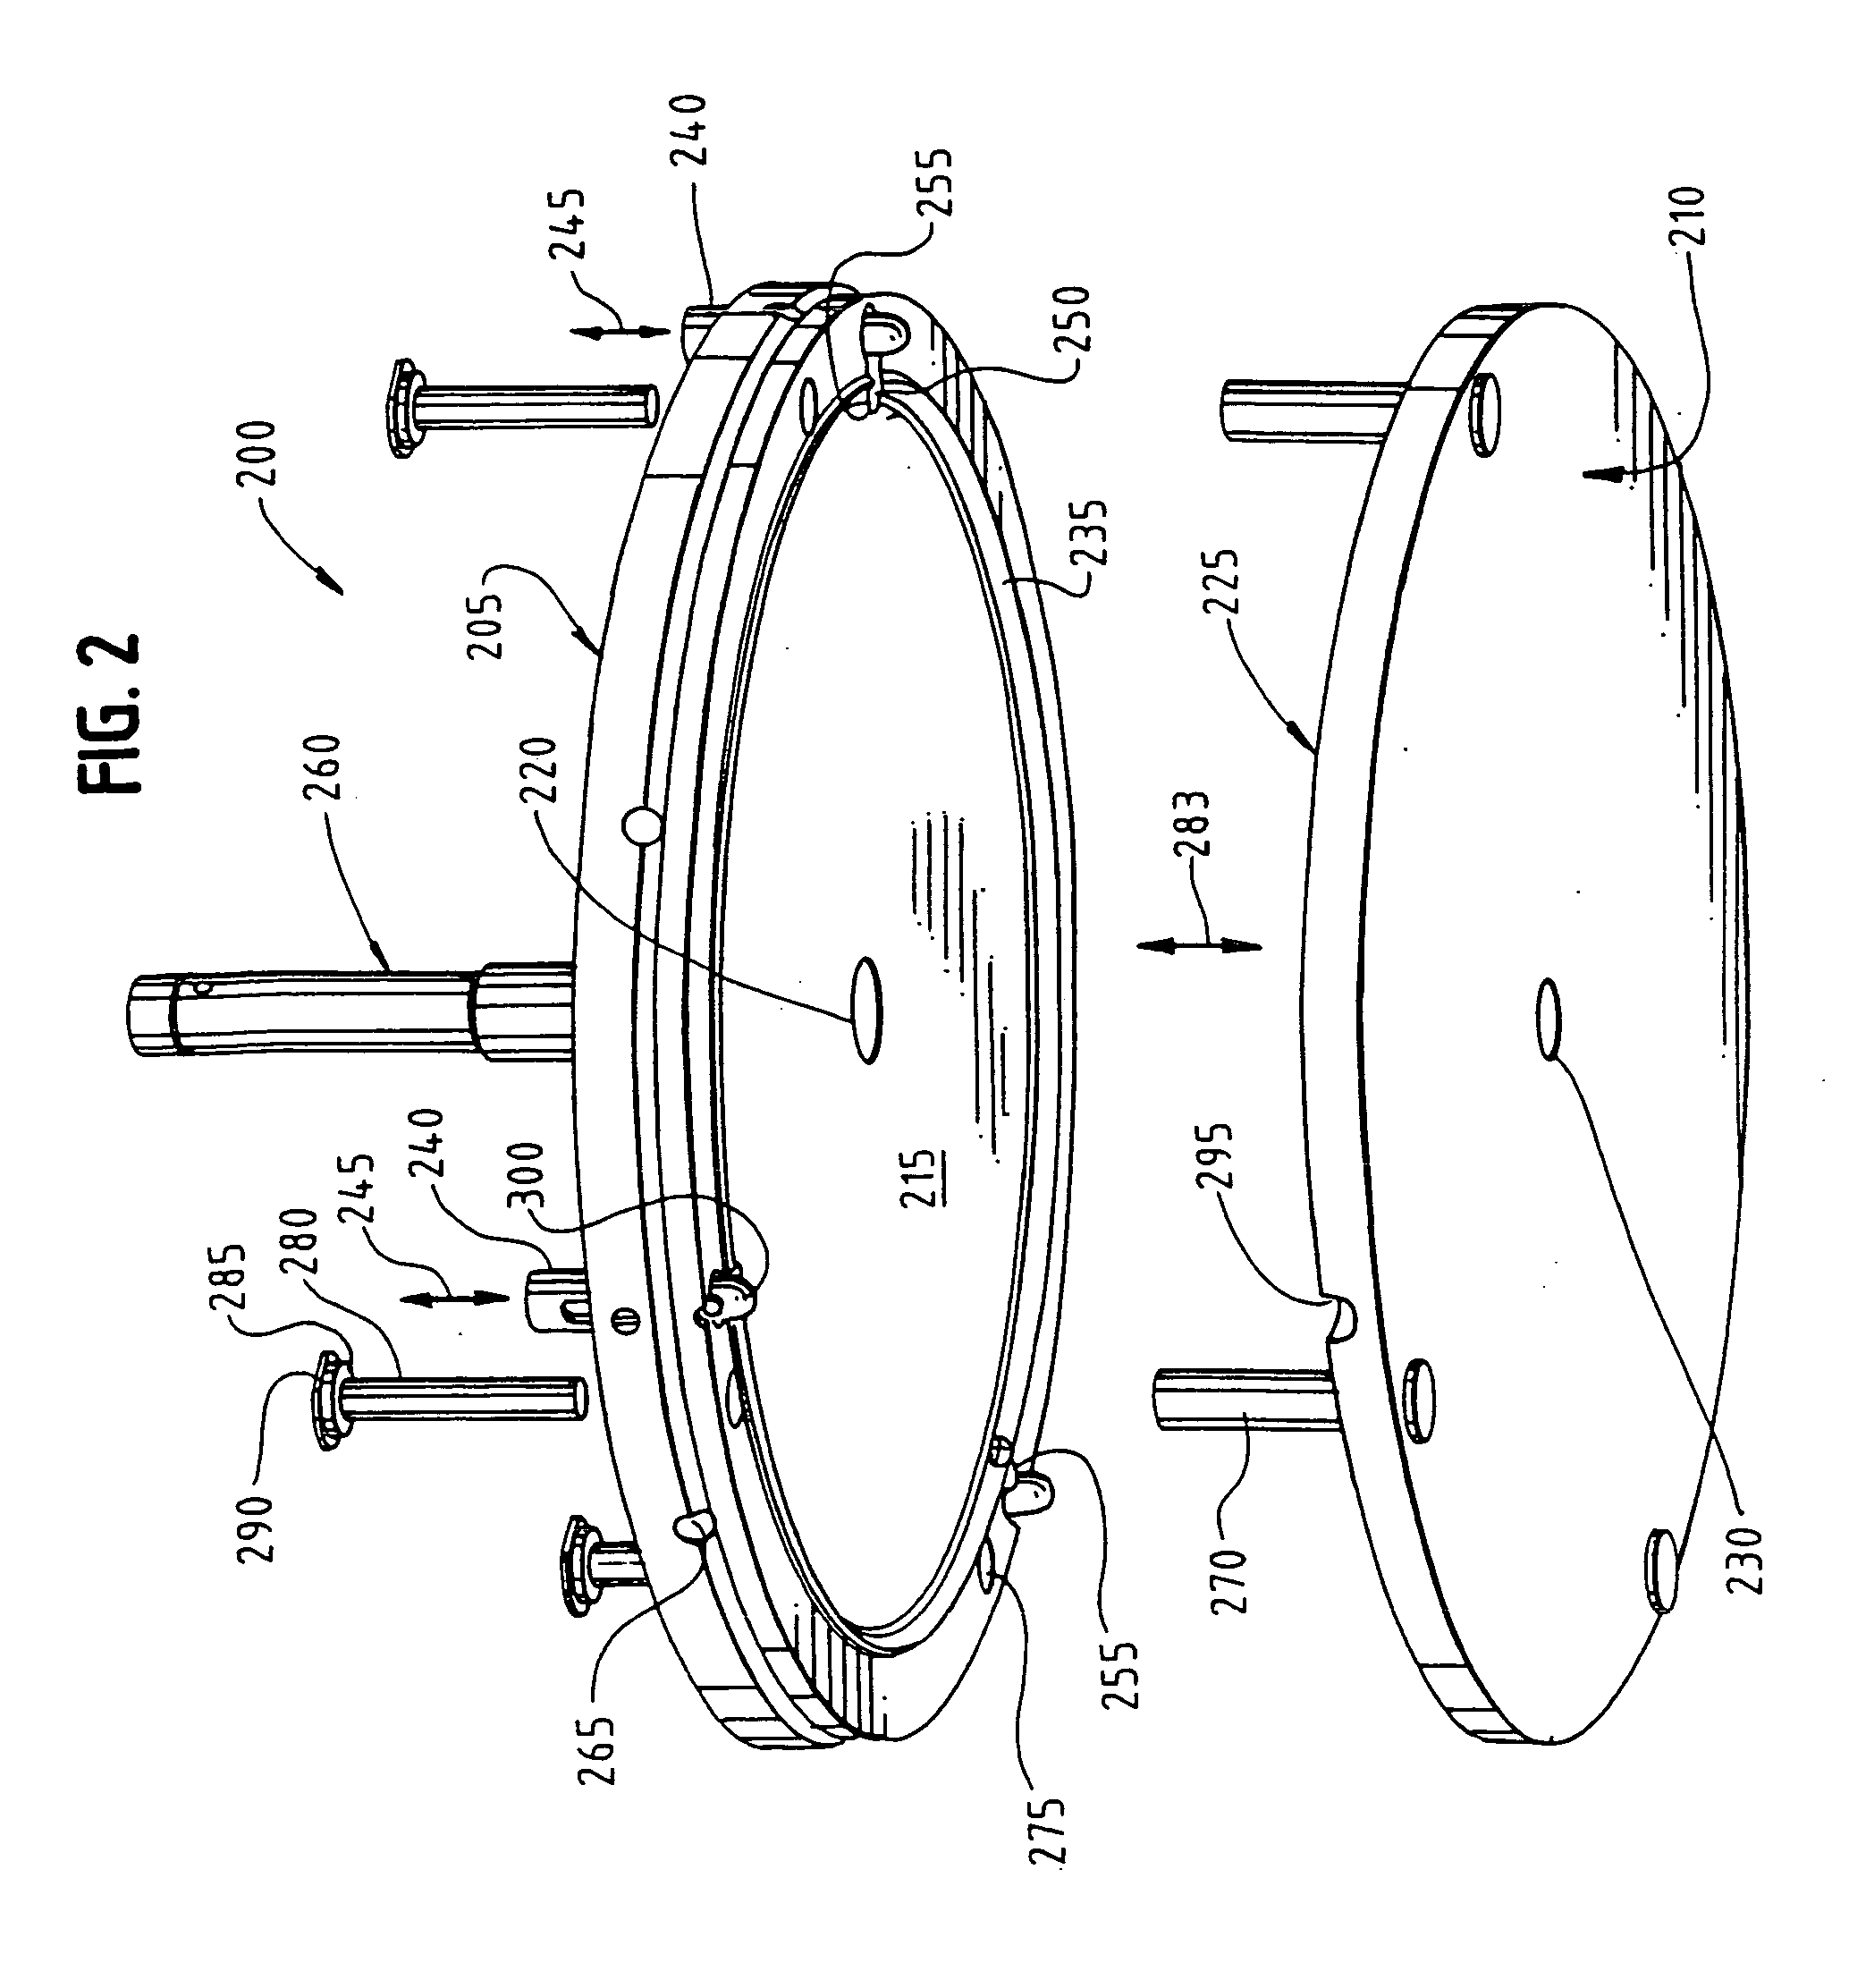 Method for processing a semiconductor wafer